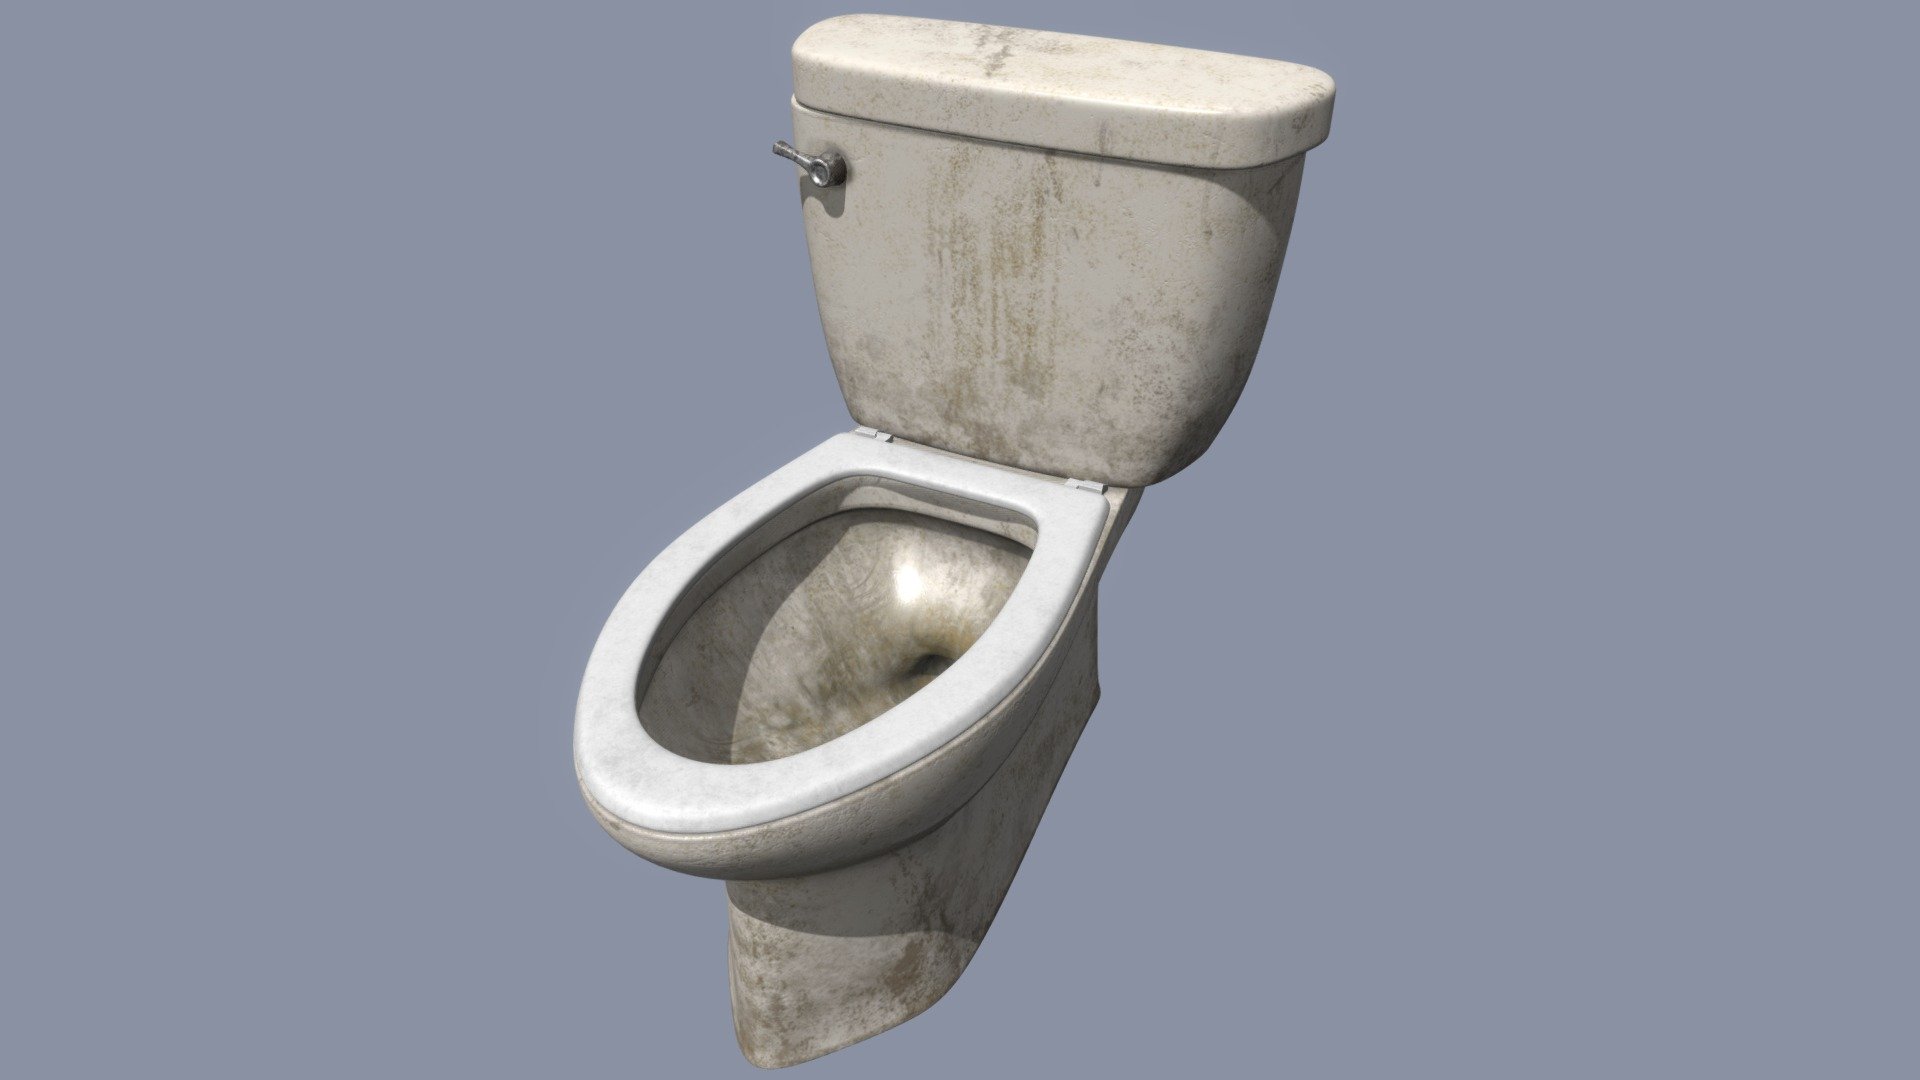 Dirty toilet (Game ready)

one is 2k resolution and the other is 4k resolution.
Some render &ndash;&gt; https://www.artstation.com/artwork/g2KDGm

Modeled in blender, textured in substance painter 3d model